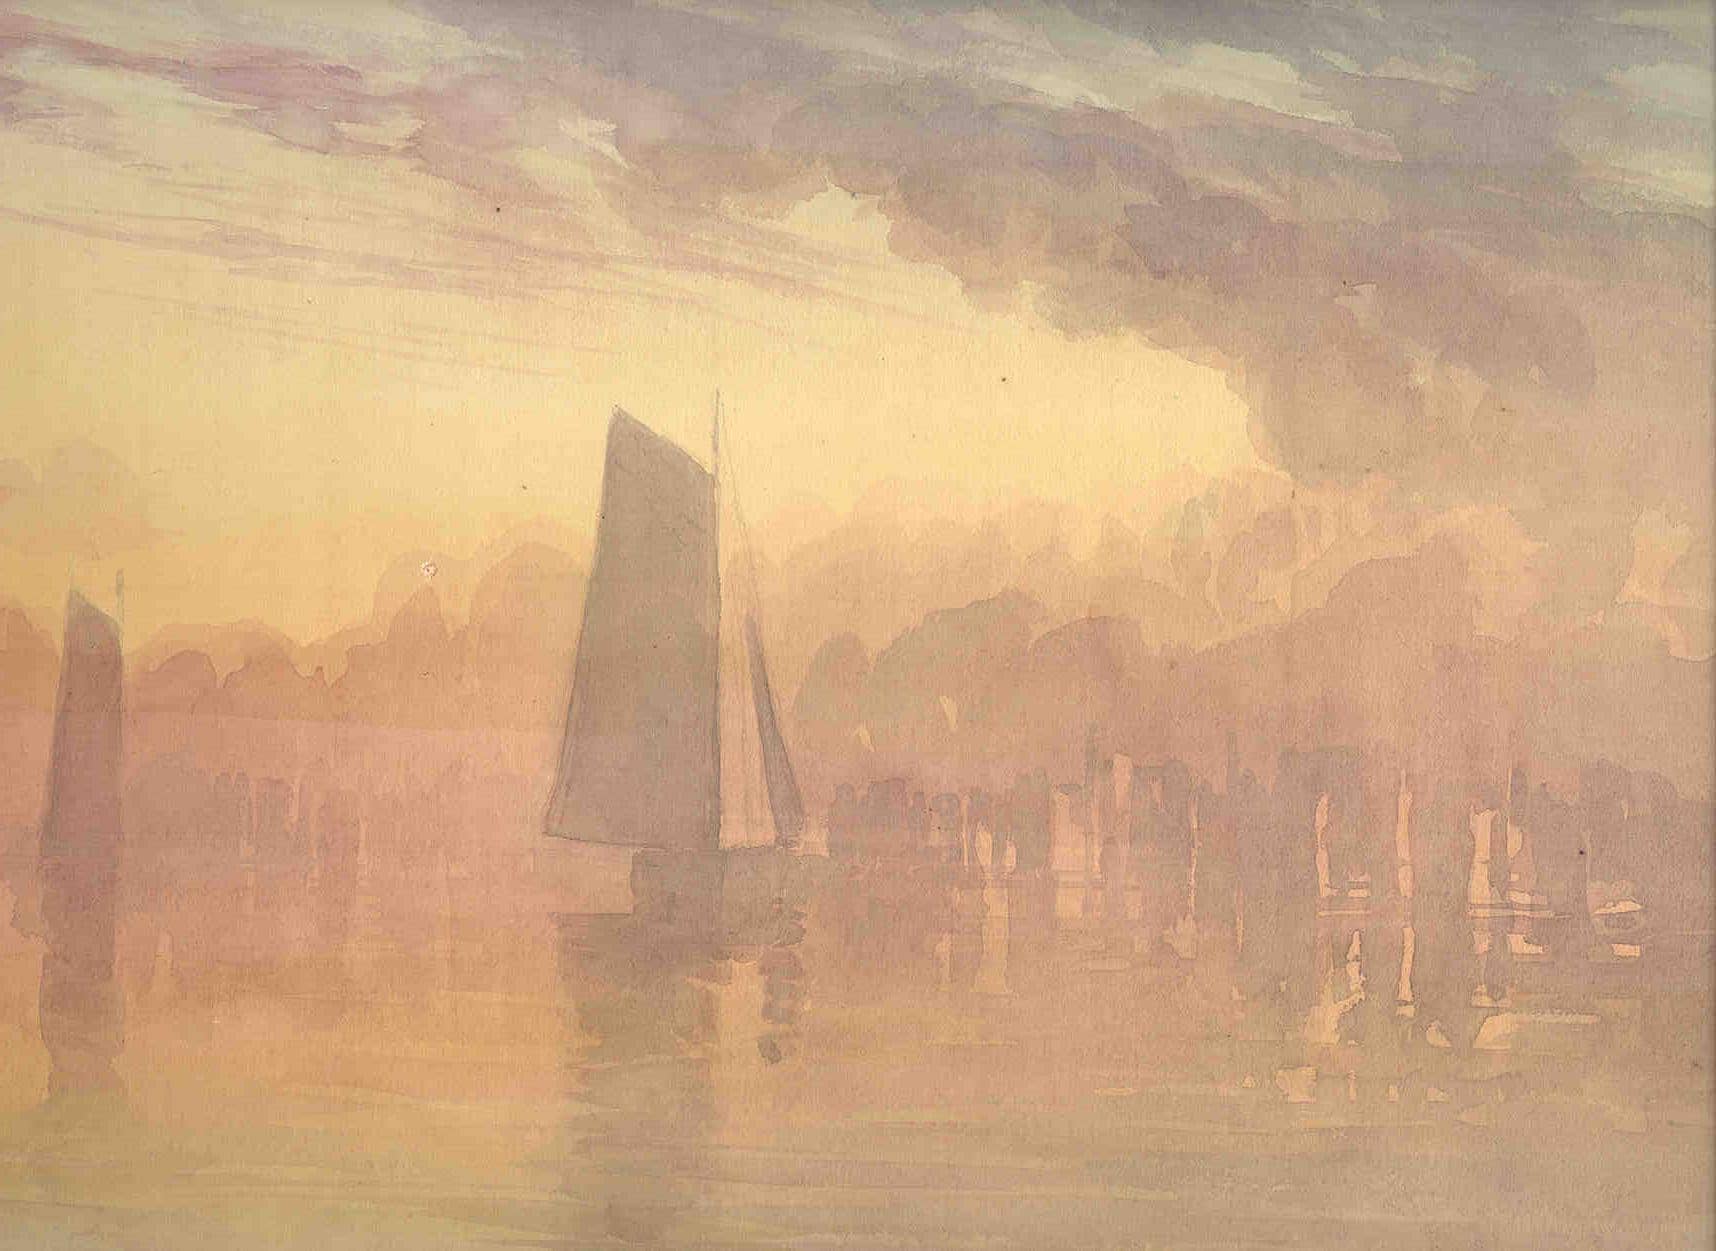 Hudson River: Sailboats at Sunset by Truman Seymour via Wiki Commons